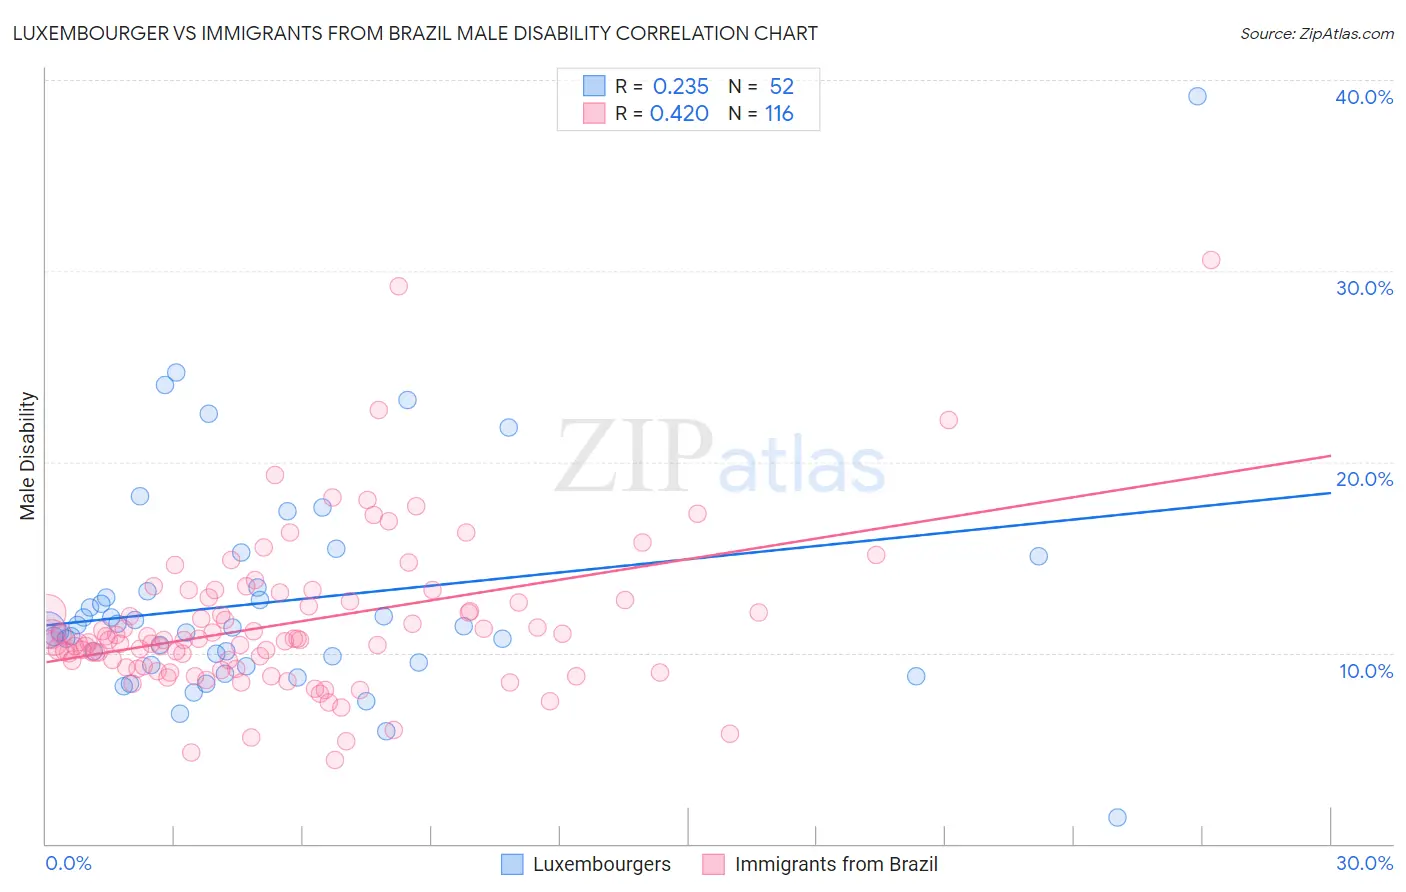 Luxembourger vs Immigrants from Brazil Male Disability